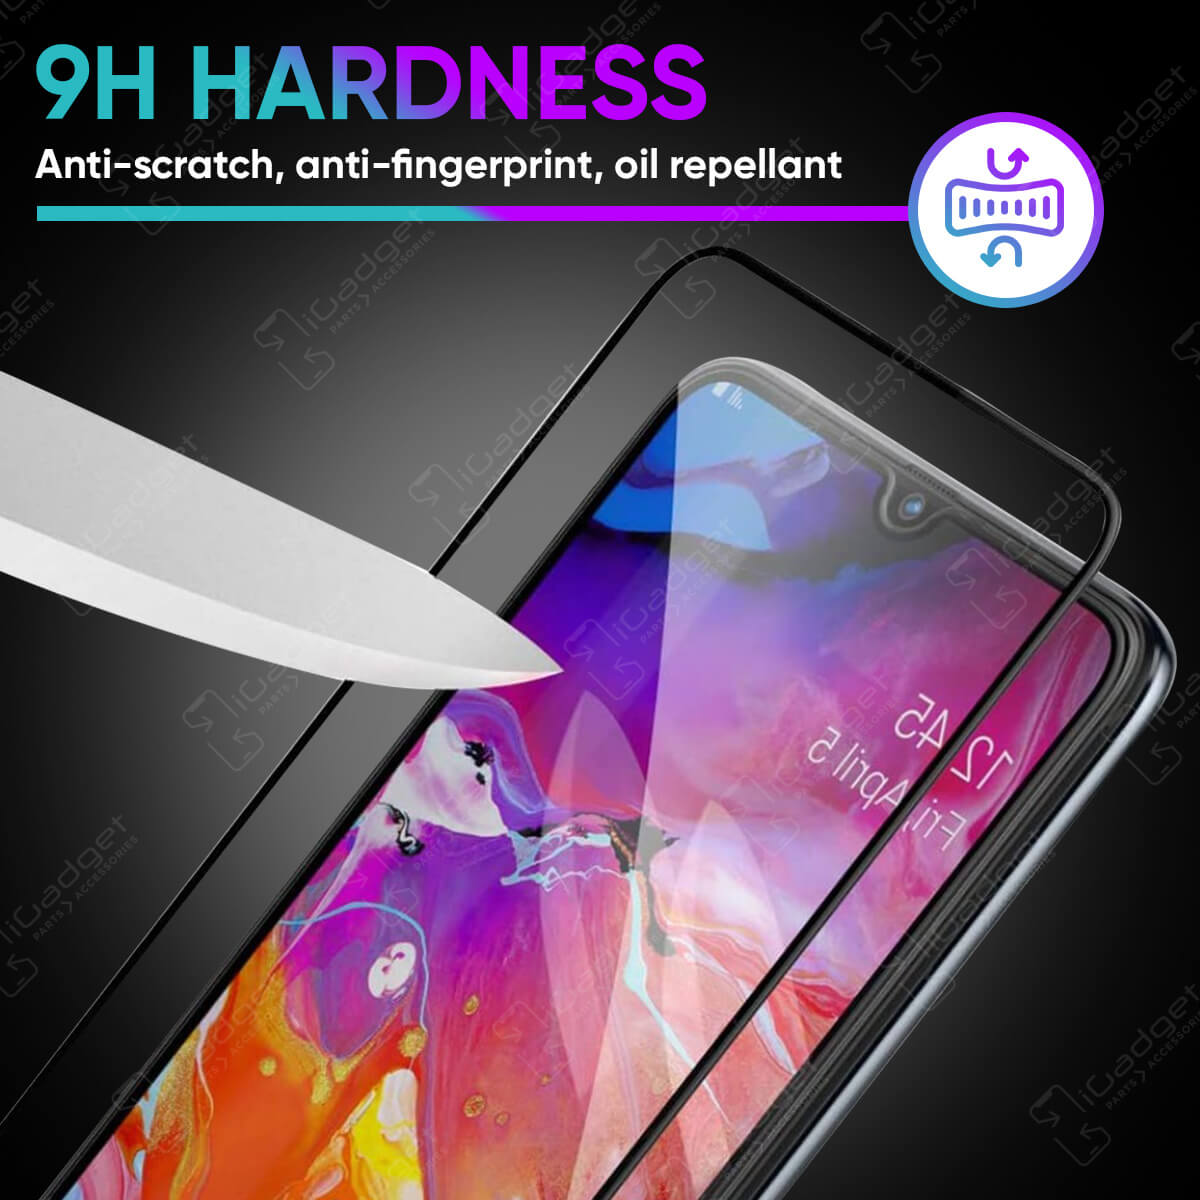 Samsung Galaxy A52/A52s Screen Protector | 3D Ultra Clear Full Coverage Tempered Glass